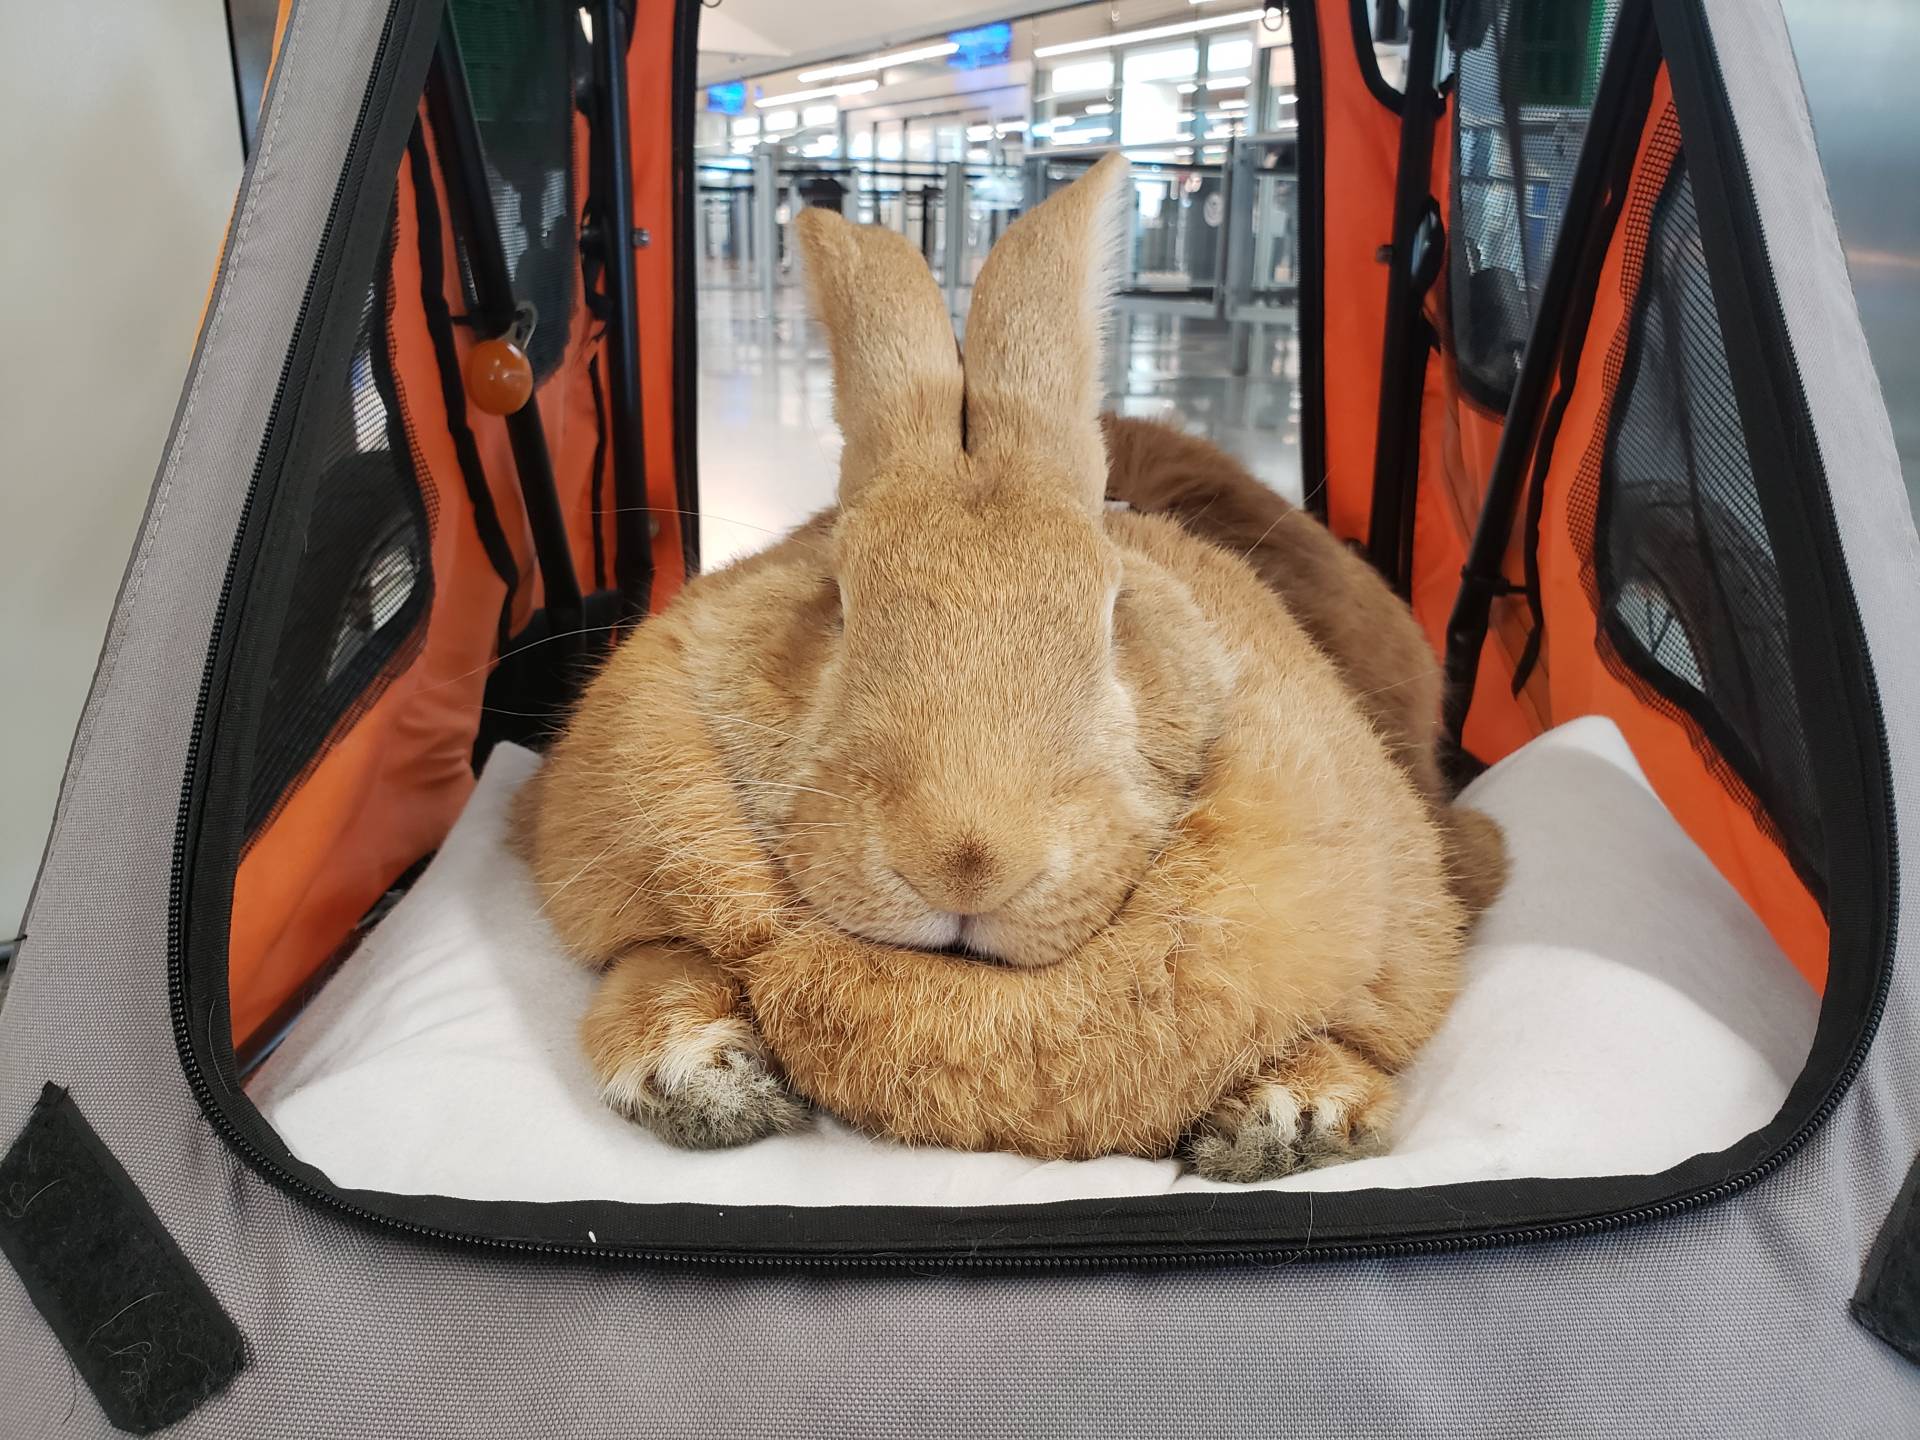 Therapy bunny Alex the Great becomes star at Giants vs. Marlins